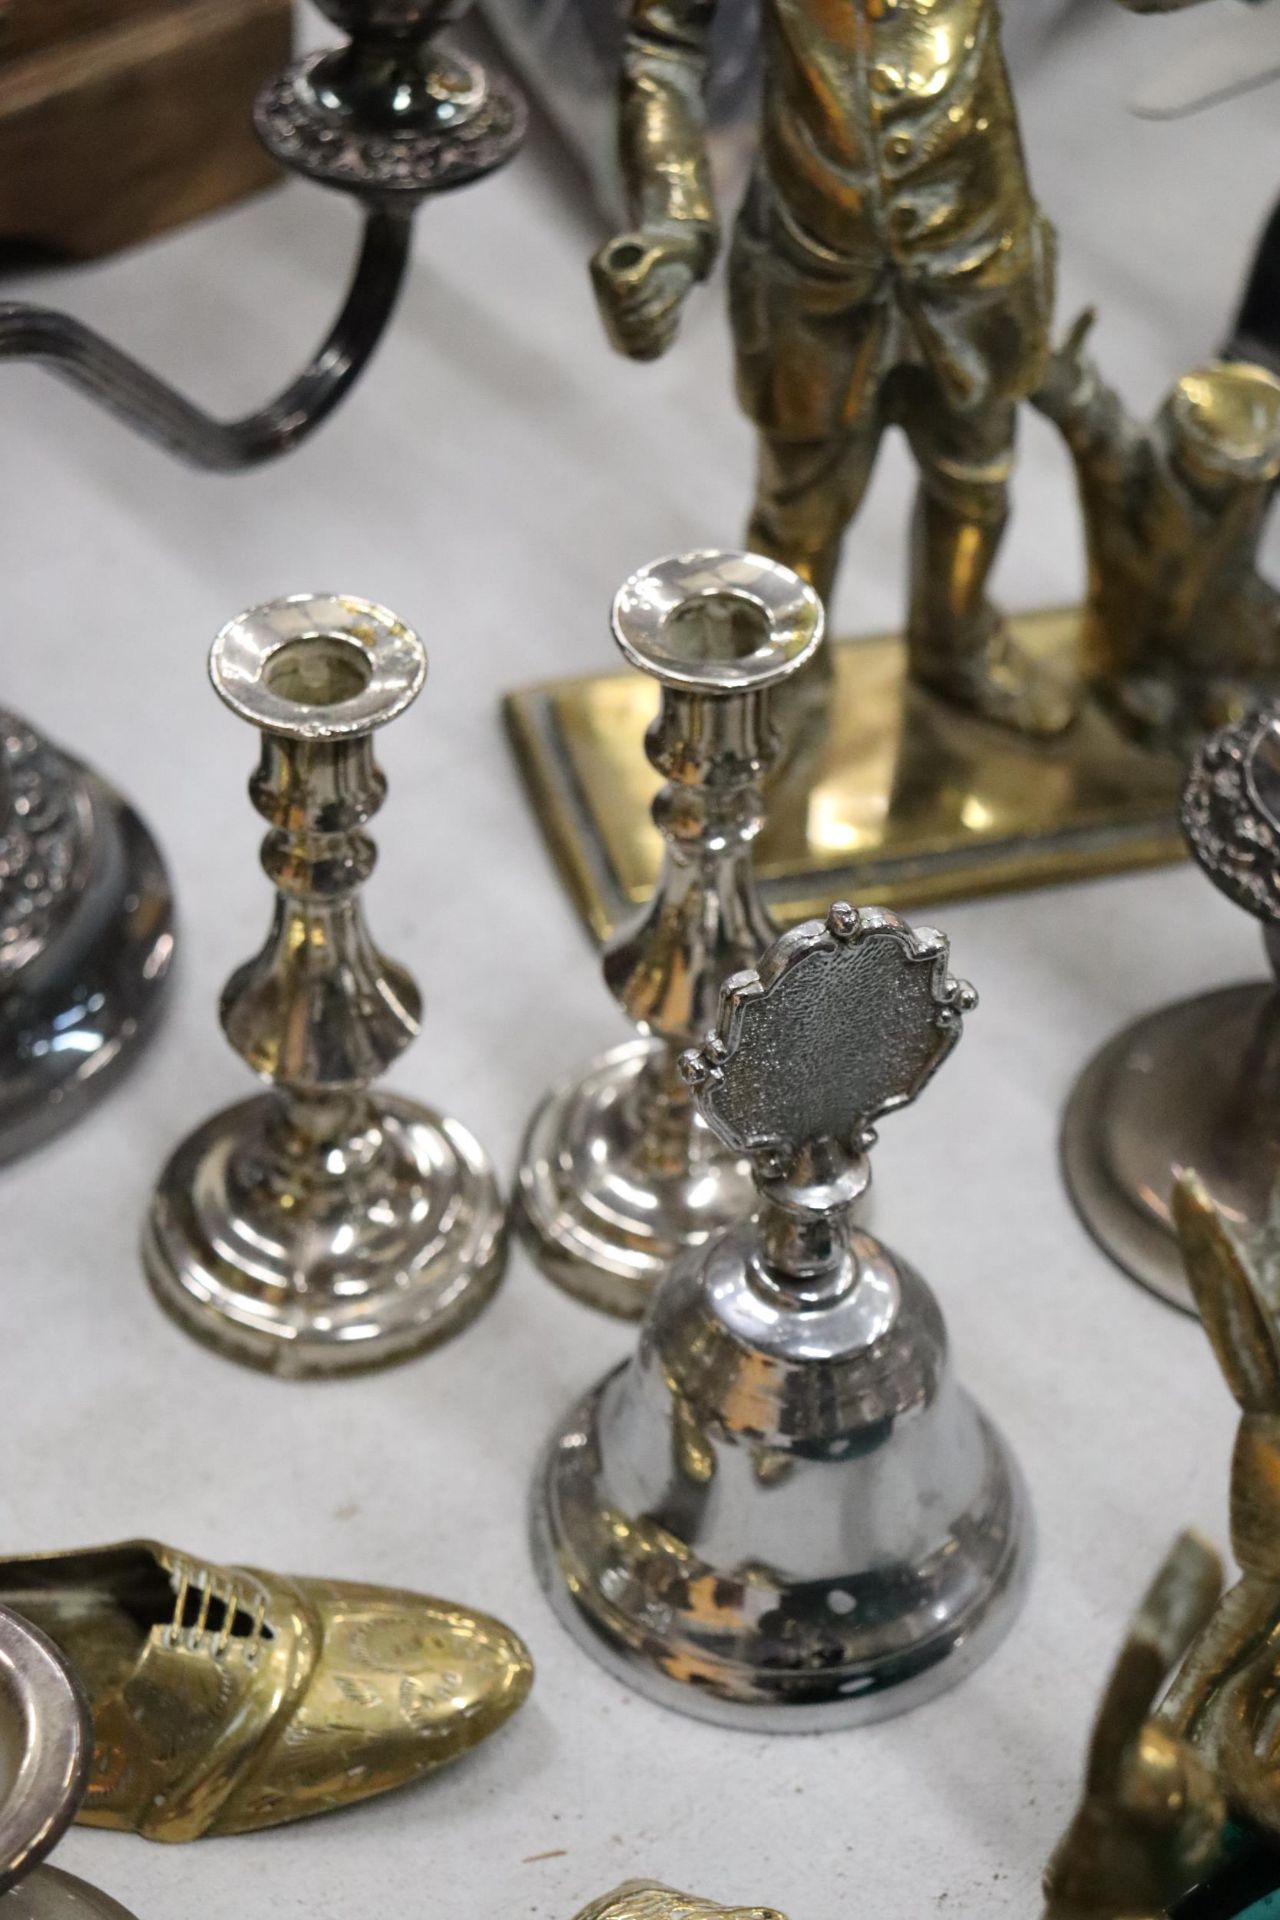 A QUANTITY OF BRASS AND SILVER PLATE TO INCLUDE A HEAVY POACHER FIGURE, CANDLESTICKS, ANIMAL - Image 10 of 15